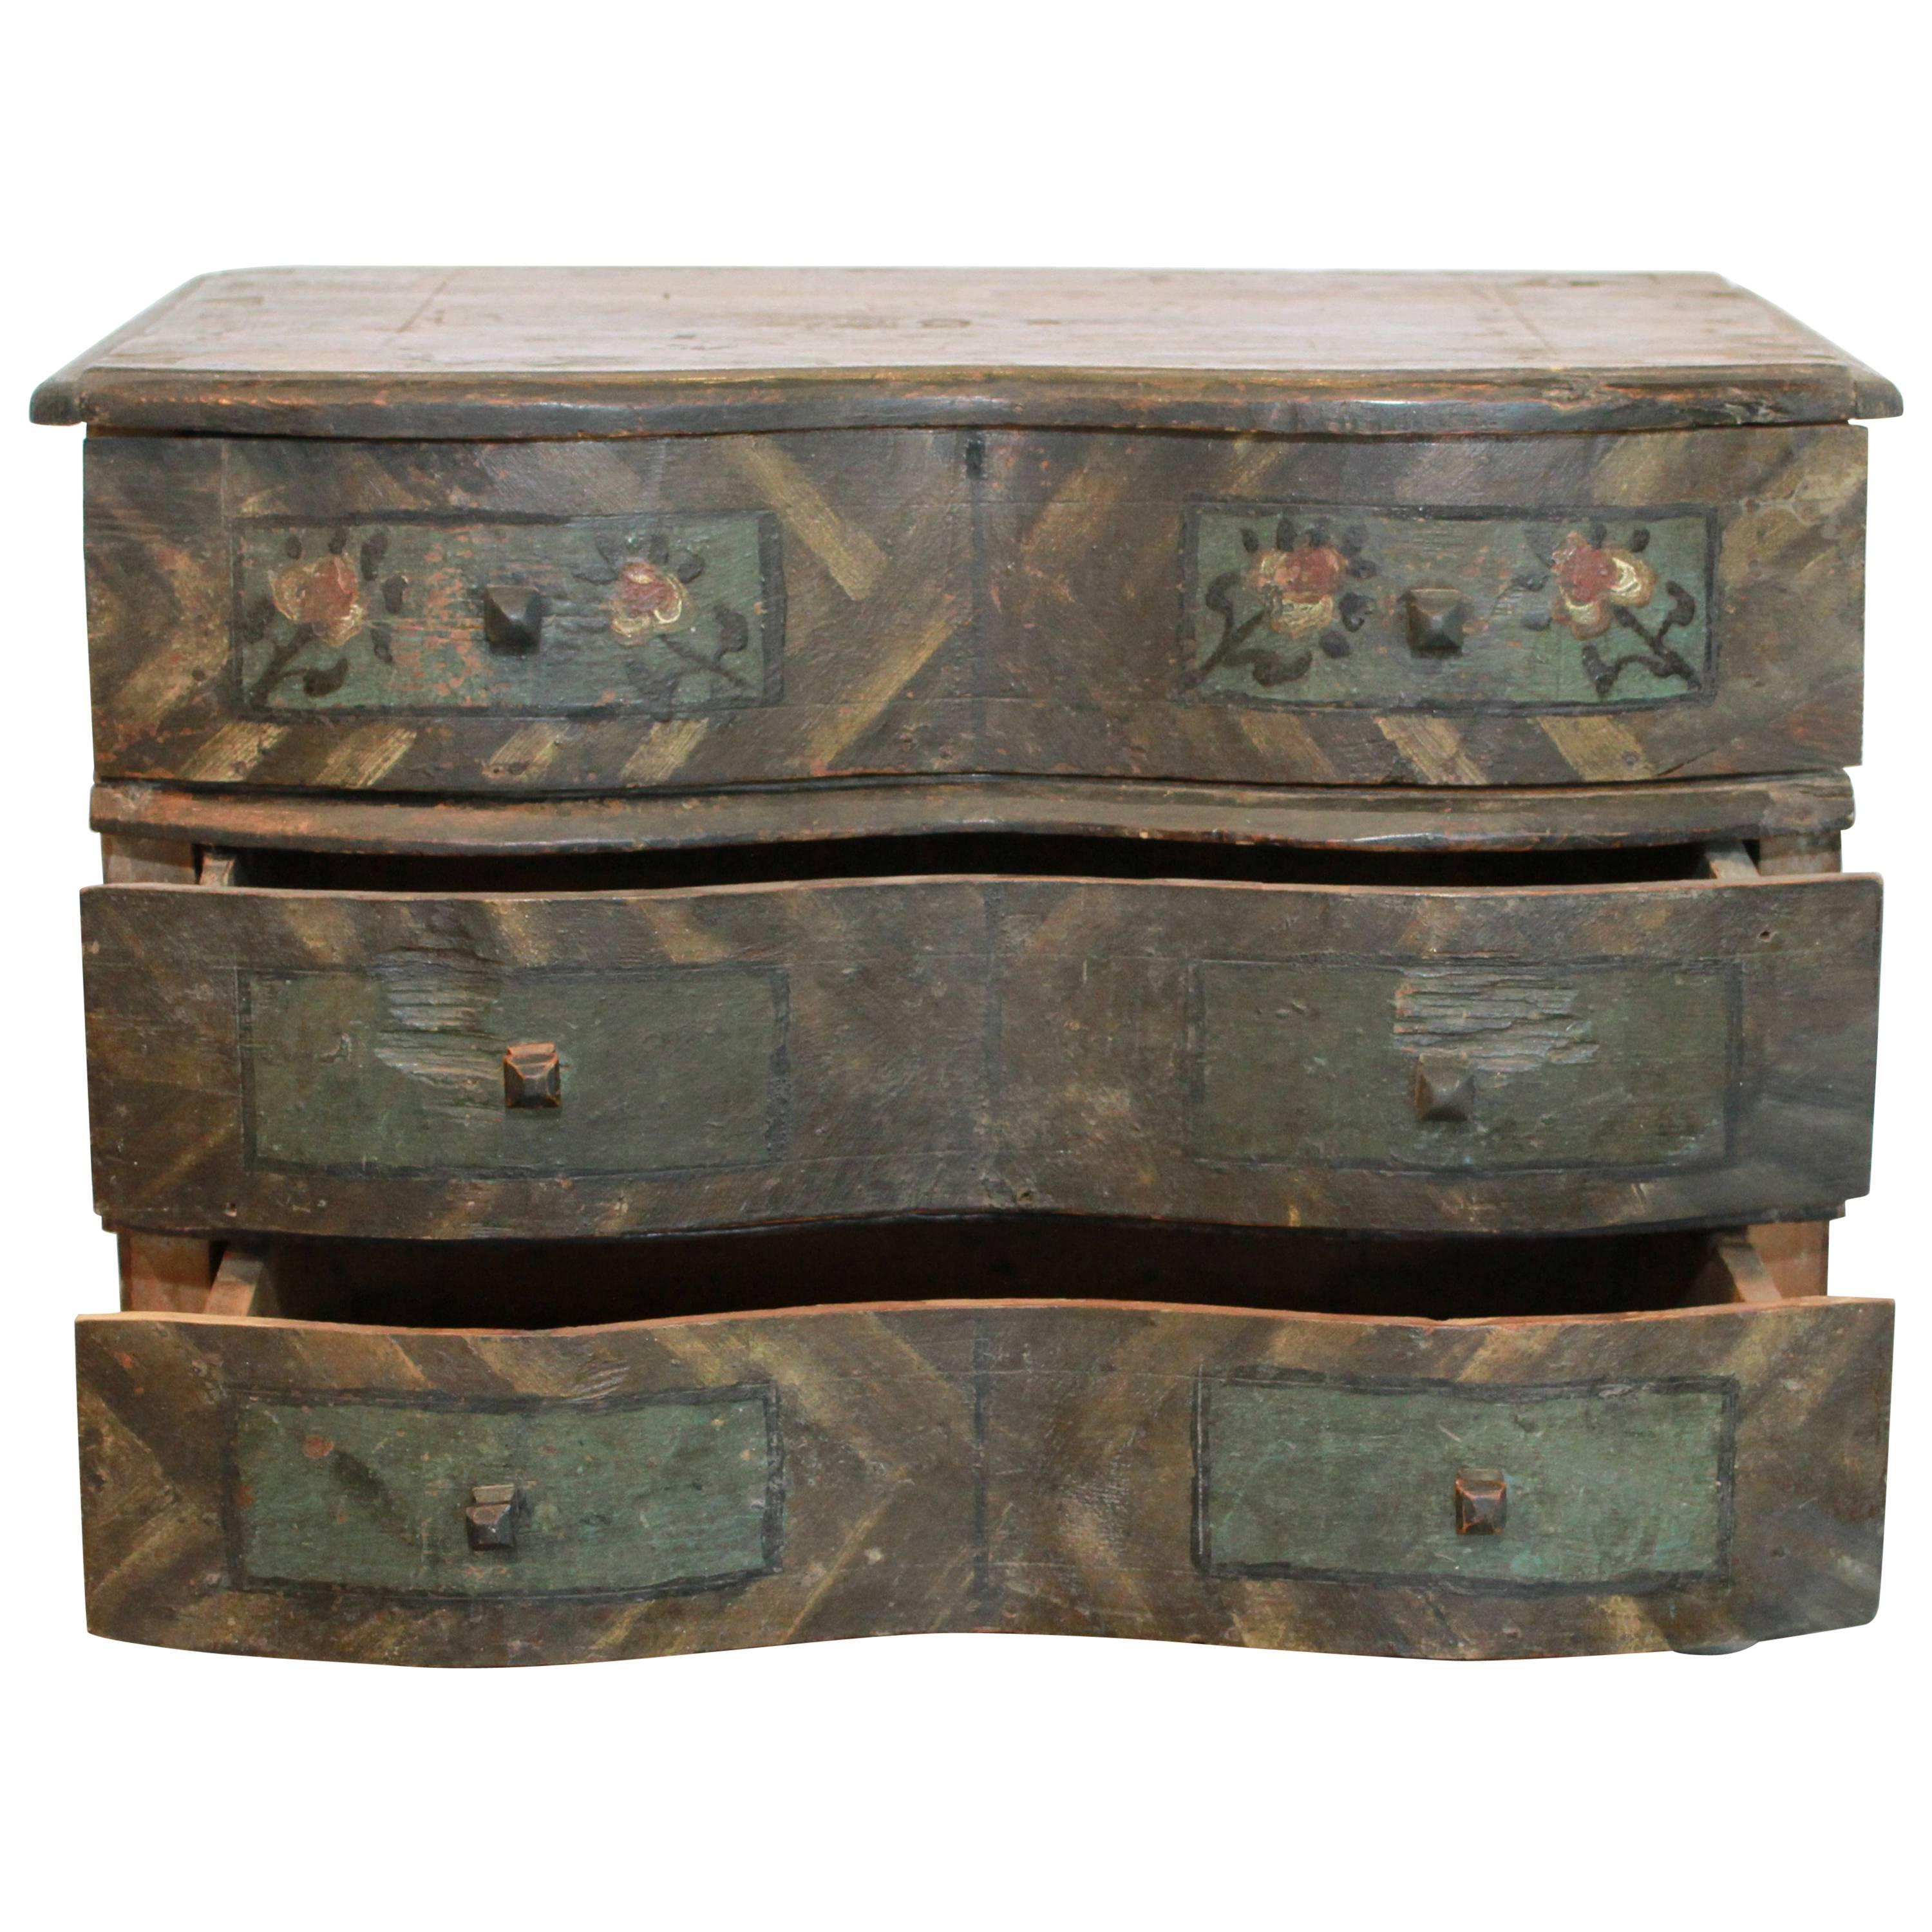 Early 19th Century Painted Jewelry Box from a Southern Swiss Alp Farmhouse For Sale